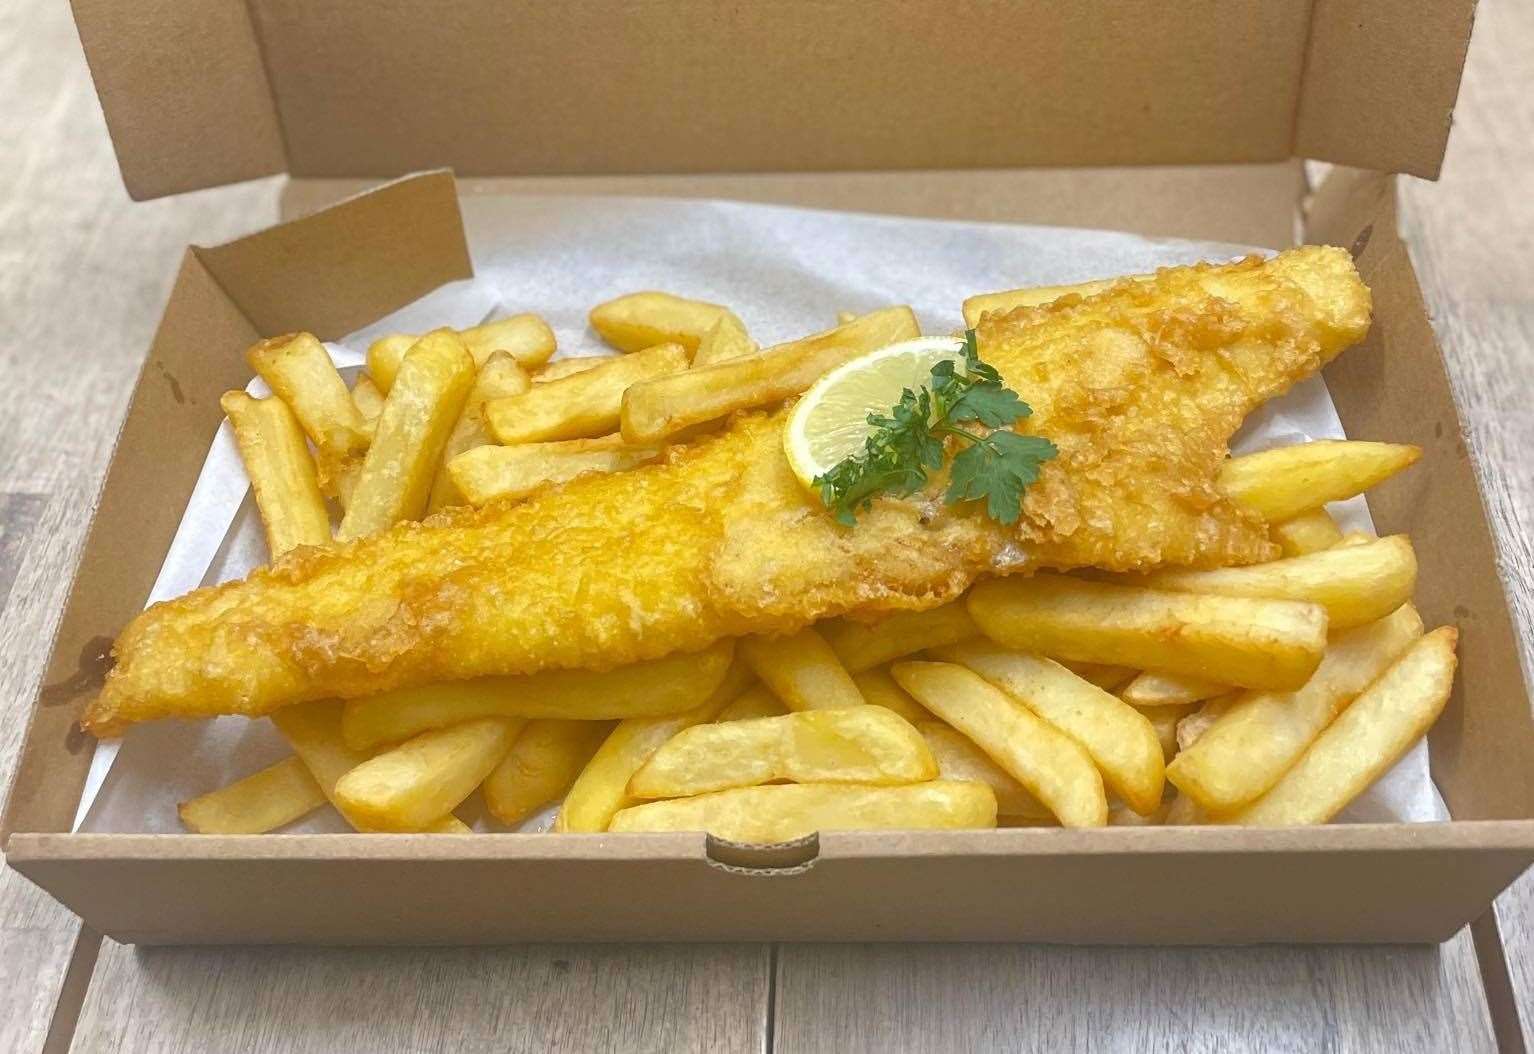 Fish and chips served at Lewis's Fish & Grill in Maidstone